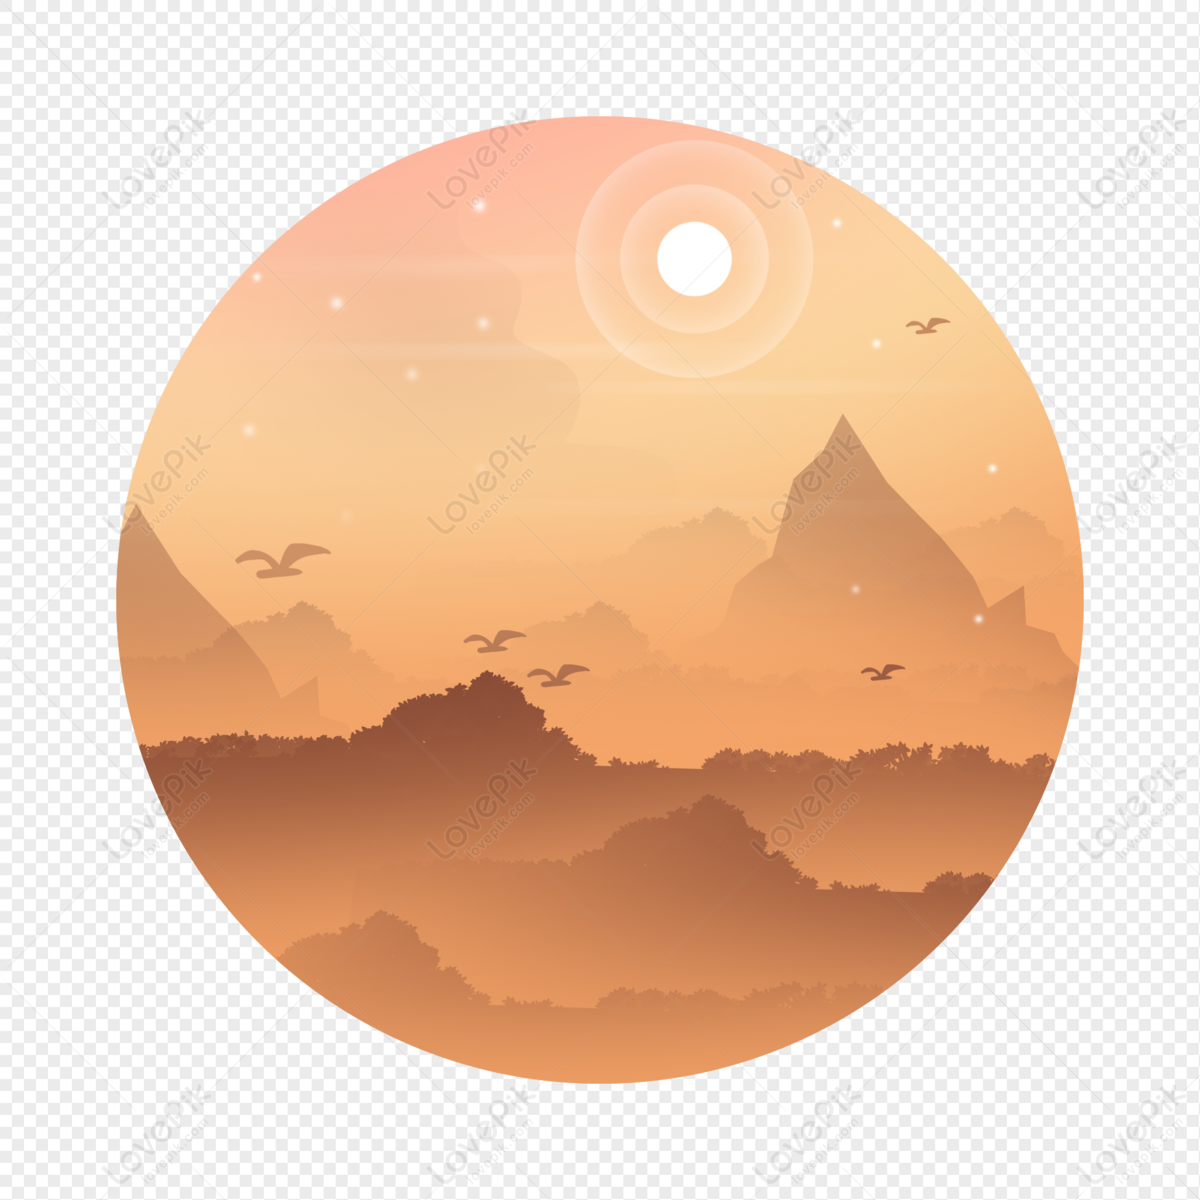 Sunset Afterglow PNG Image Free Download And Clipart Image For Free ...